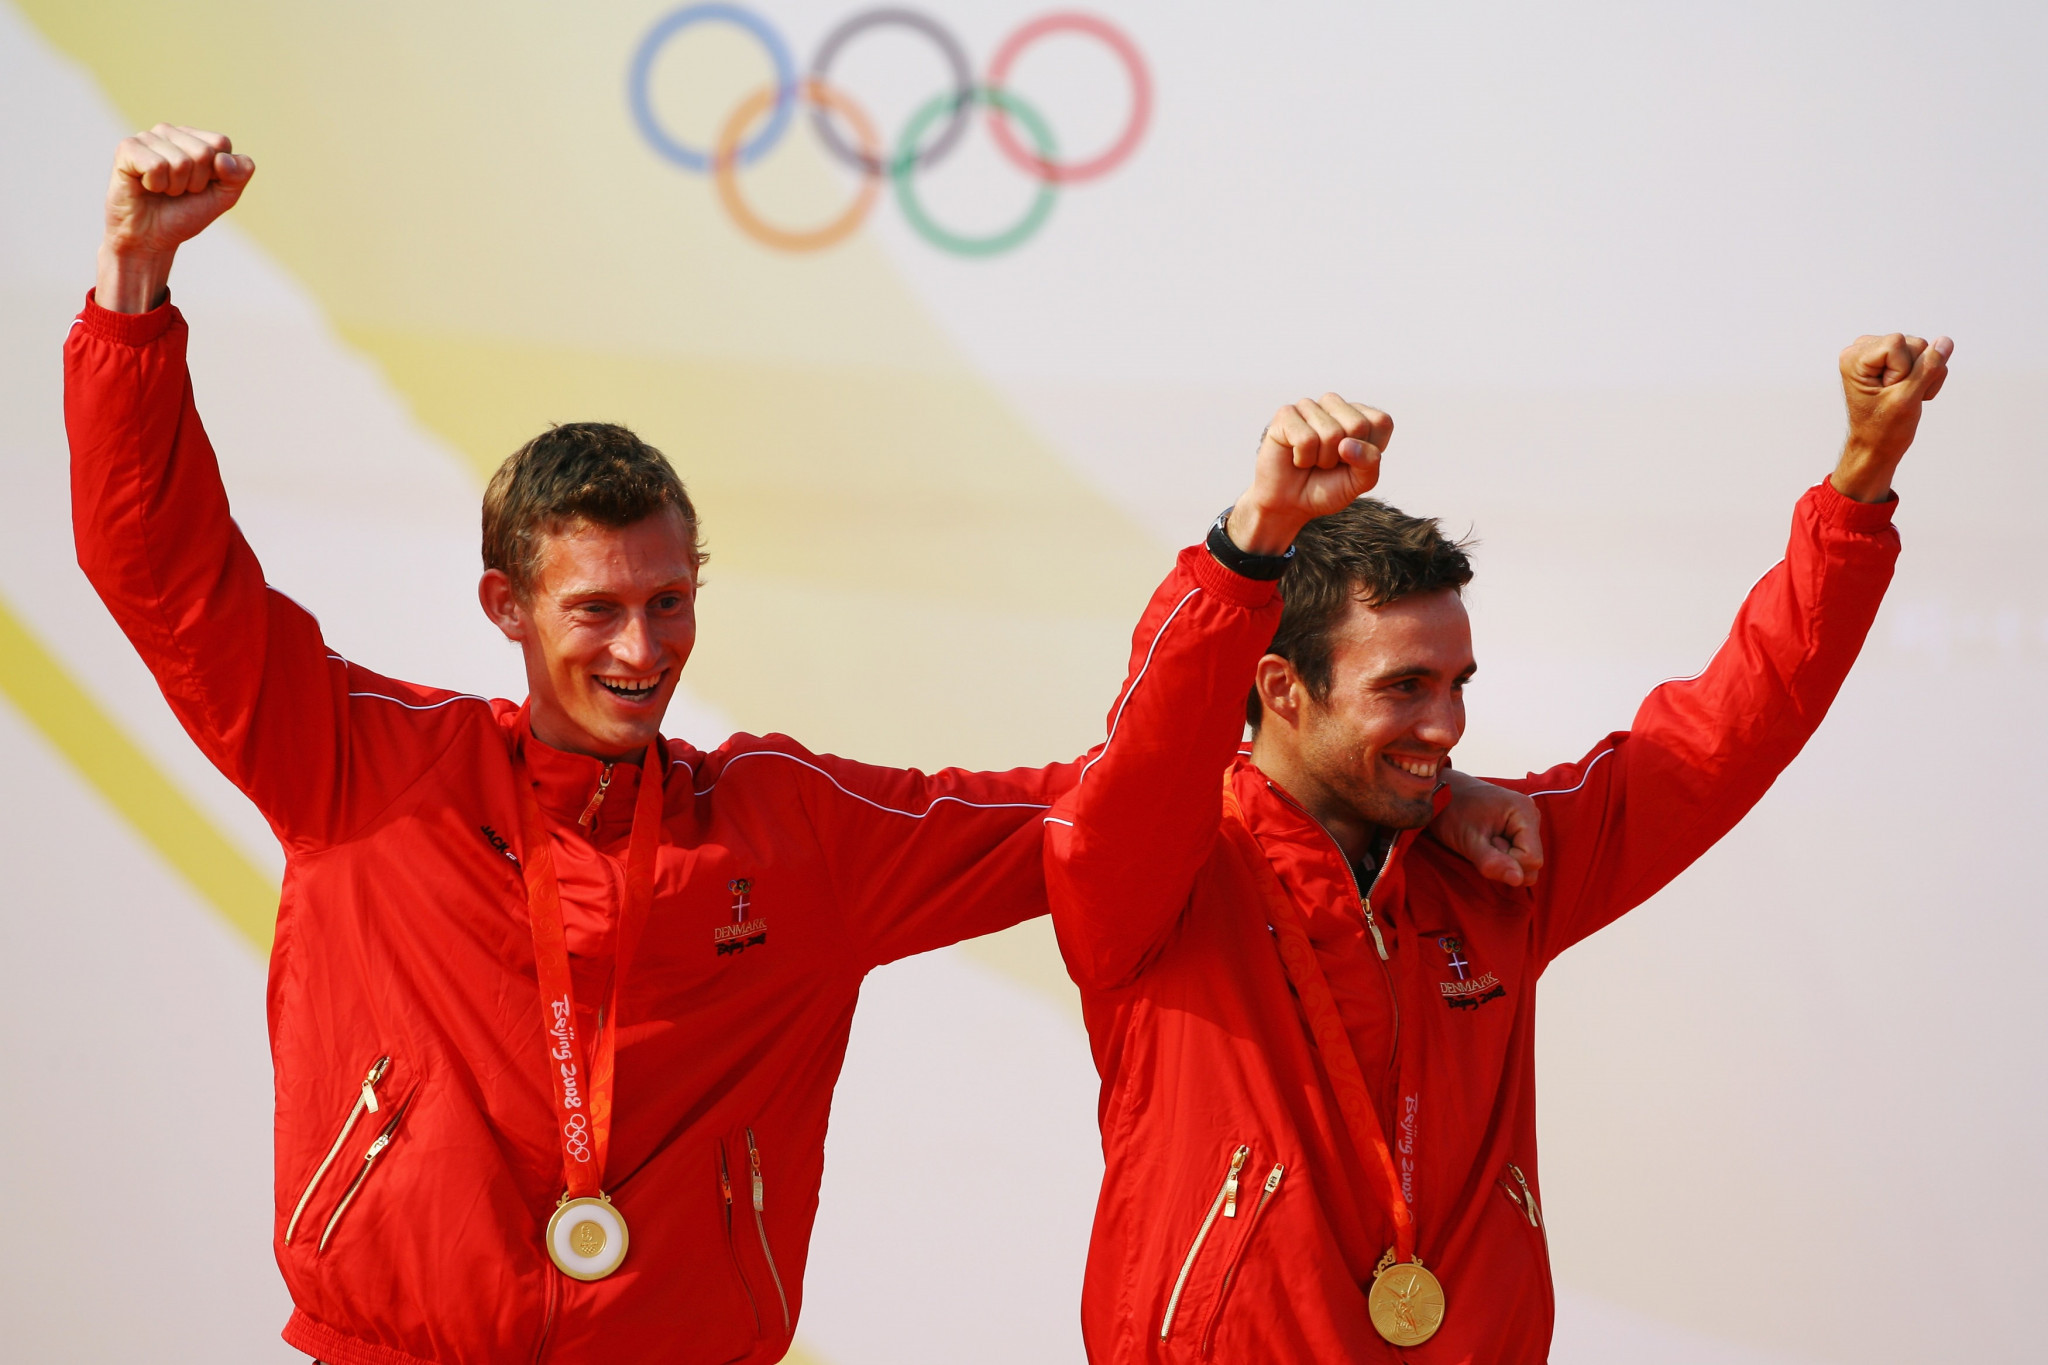 Martin Kirketerp, left, looks back with fondness of the gold medal he won alongside Jonas Warrer at Beijing 2008 but insisted it was important the sport move forward with the times ©Getty Images